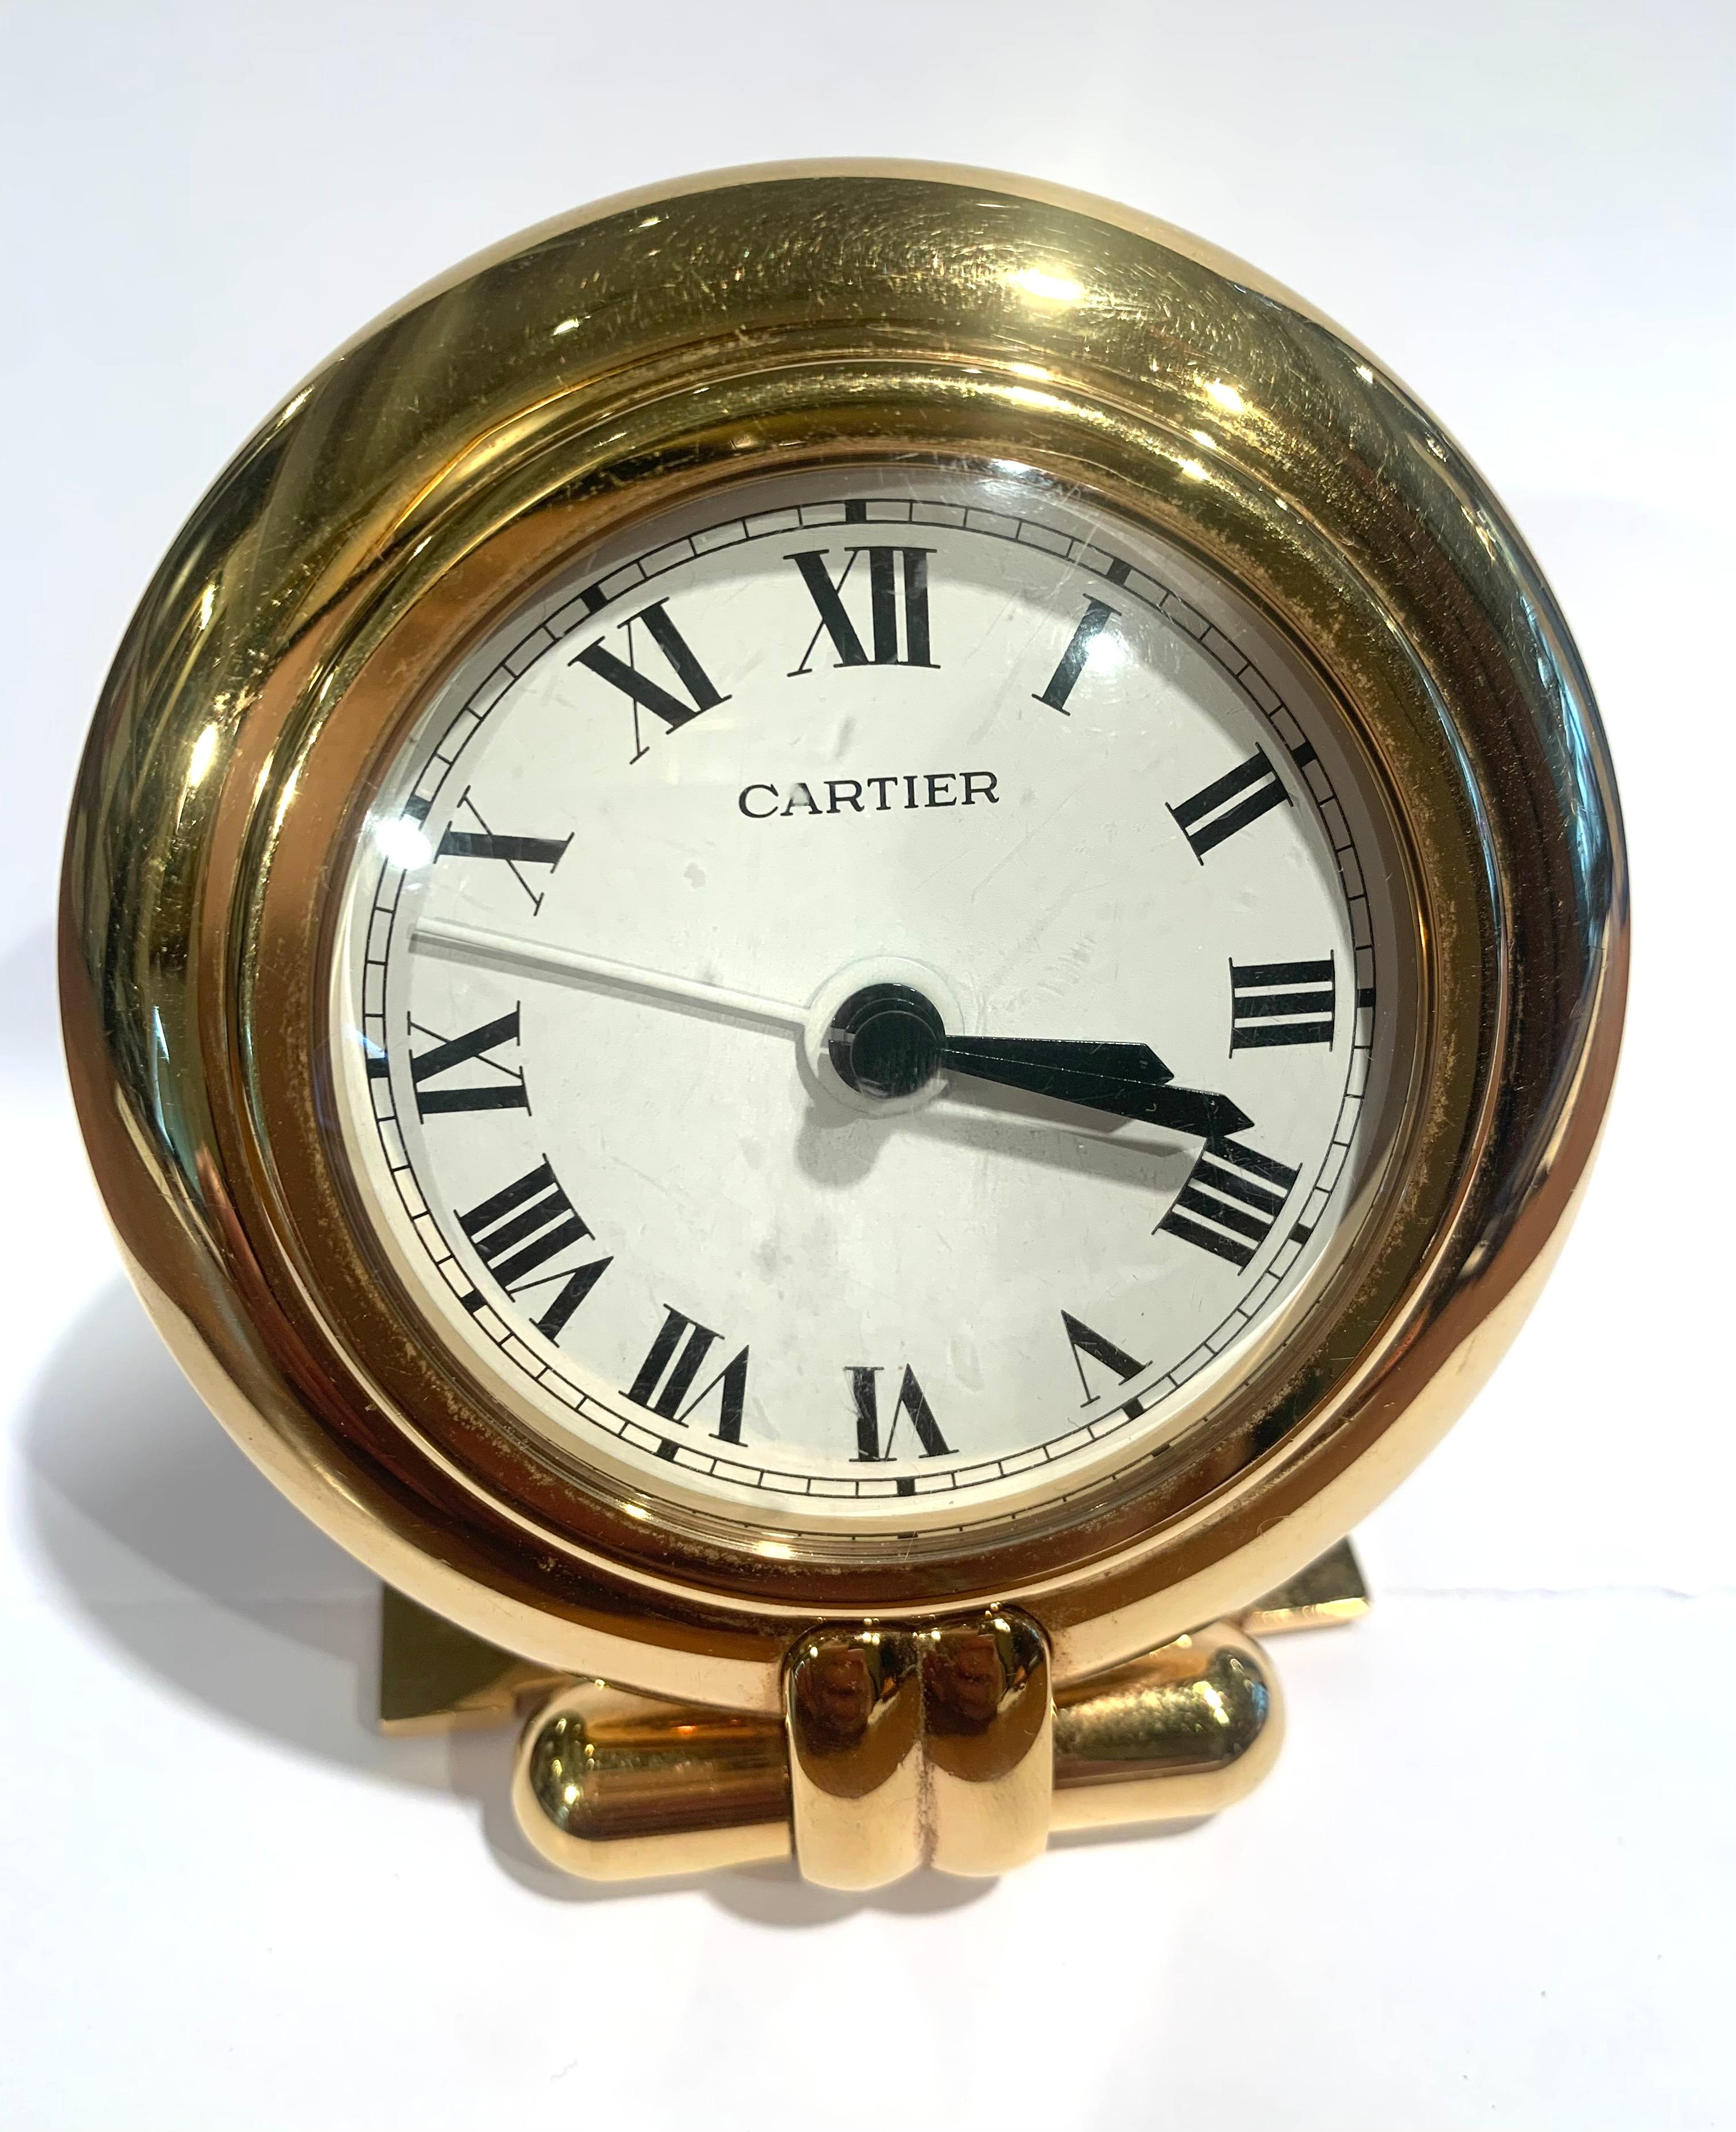 Very nice Cartier clock with a round case resting on an easel formed by the C of Cartier. White dial with Roman numerals, railroad timer and white hand to adjust the alarm function.

Model: Colisée

Year: 1998

Case: Gold plated stainless